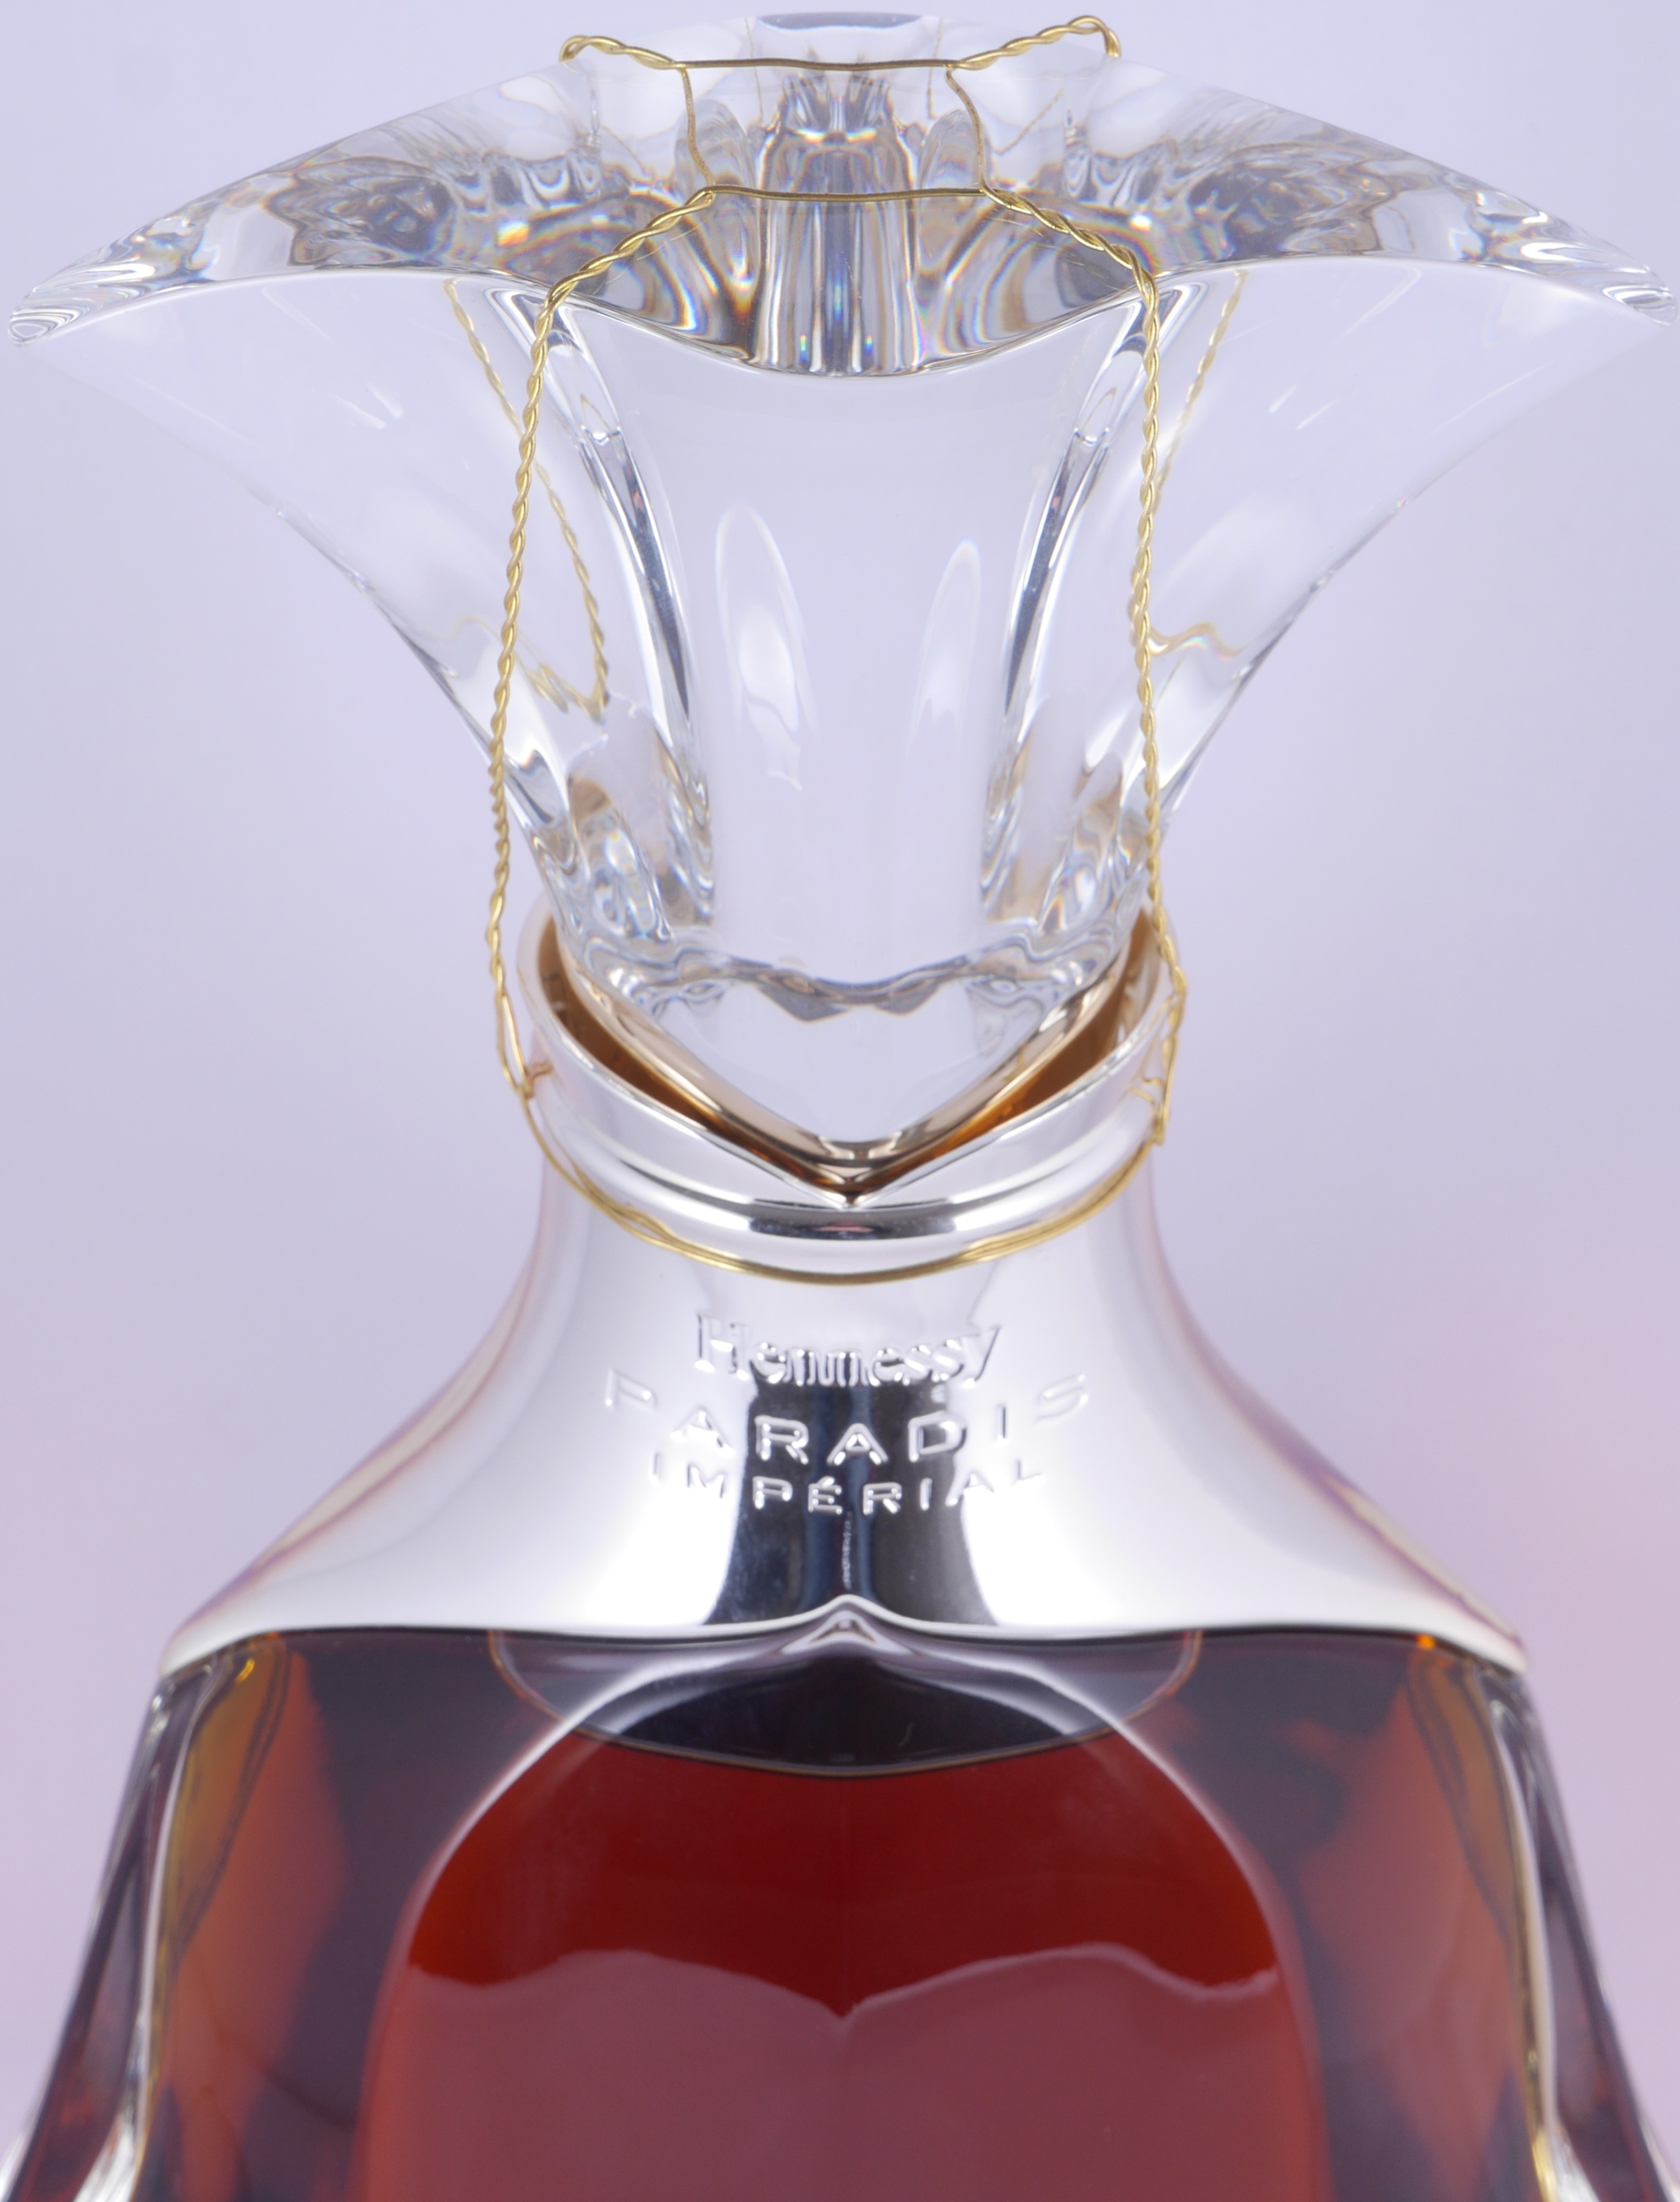 Buy Hennessy Paradis Imperial Cognac 40.0% Vol. at AmCom secure online